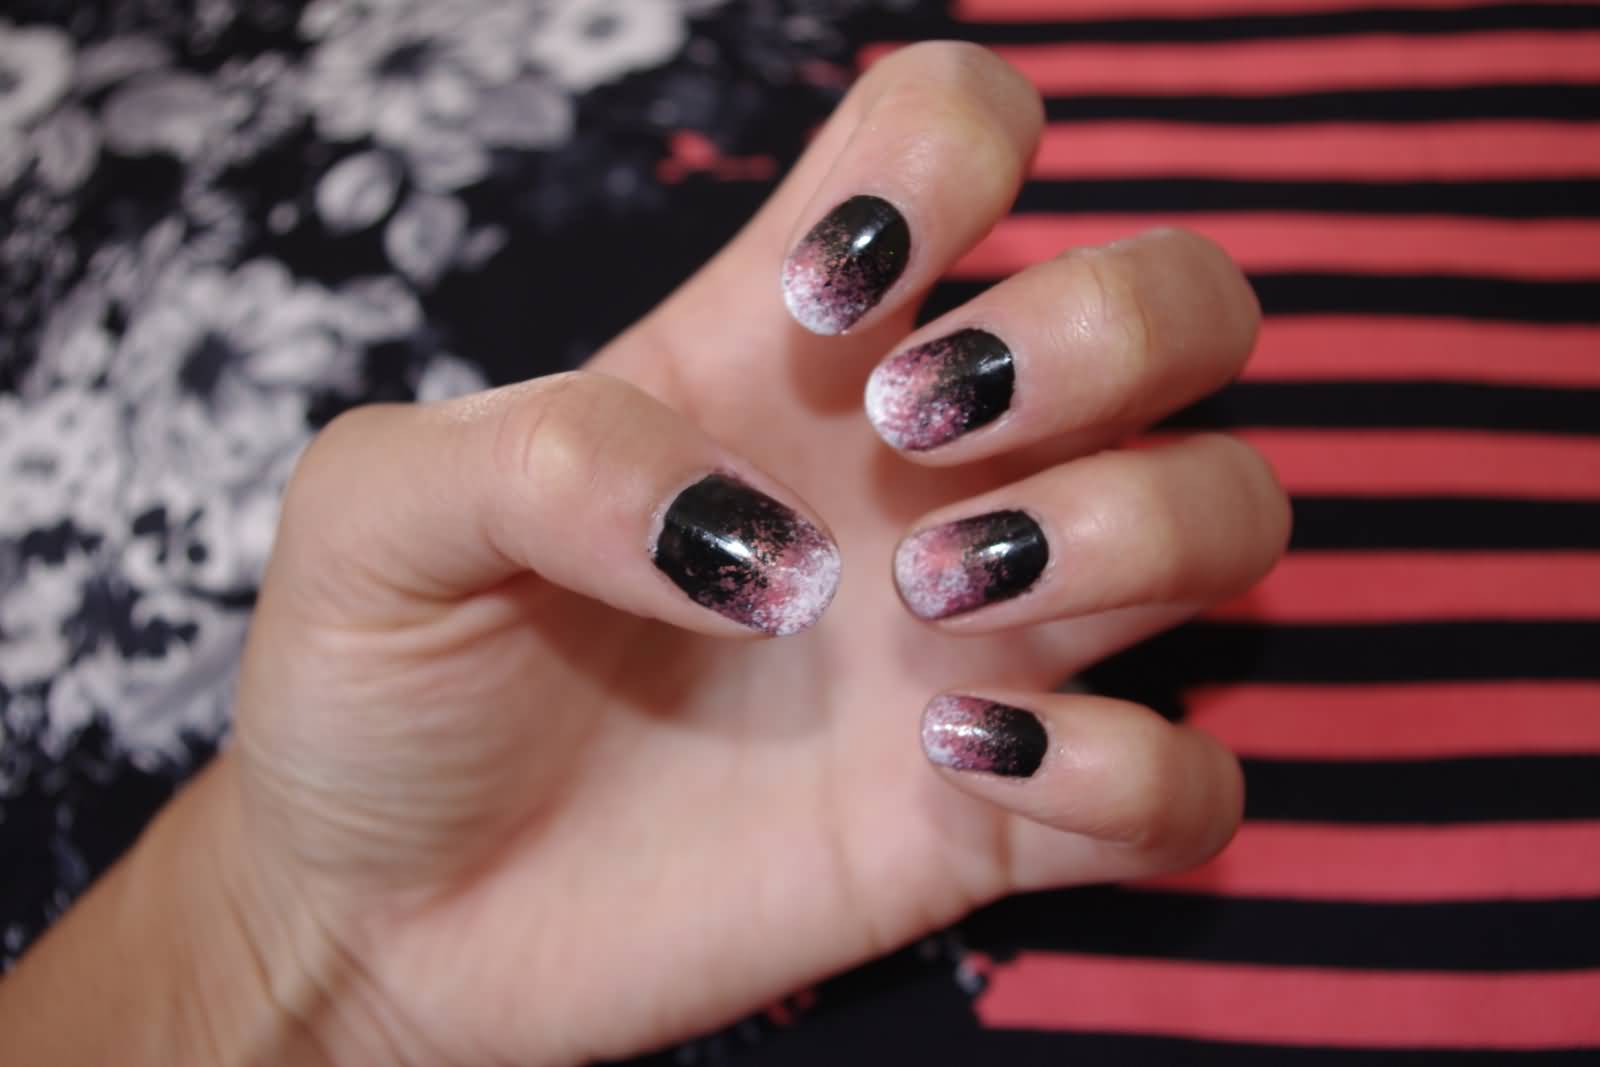 2. "Black and Pink Ombre Nail Art" - wide 10